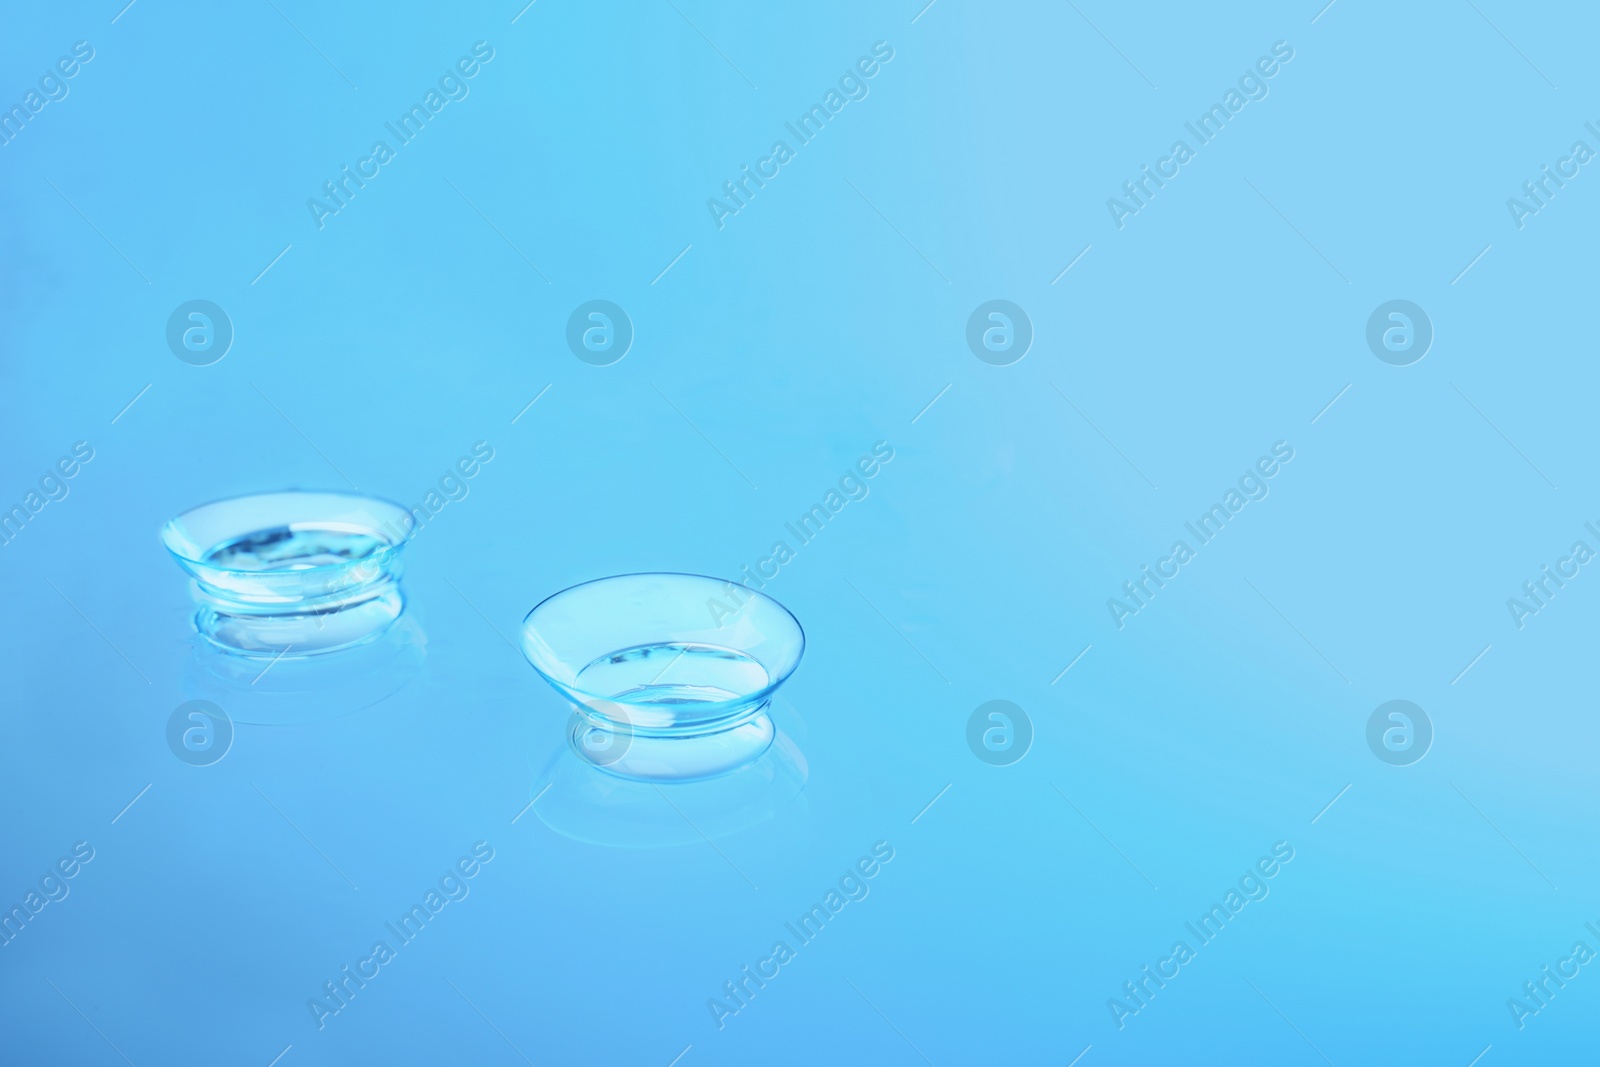 Photo of Contact lenses on glass background